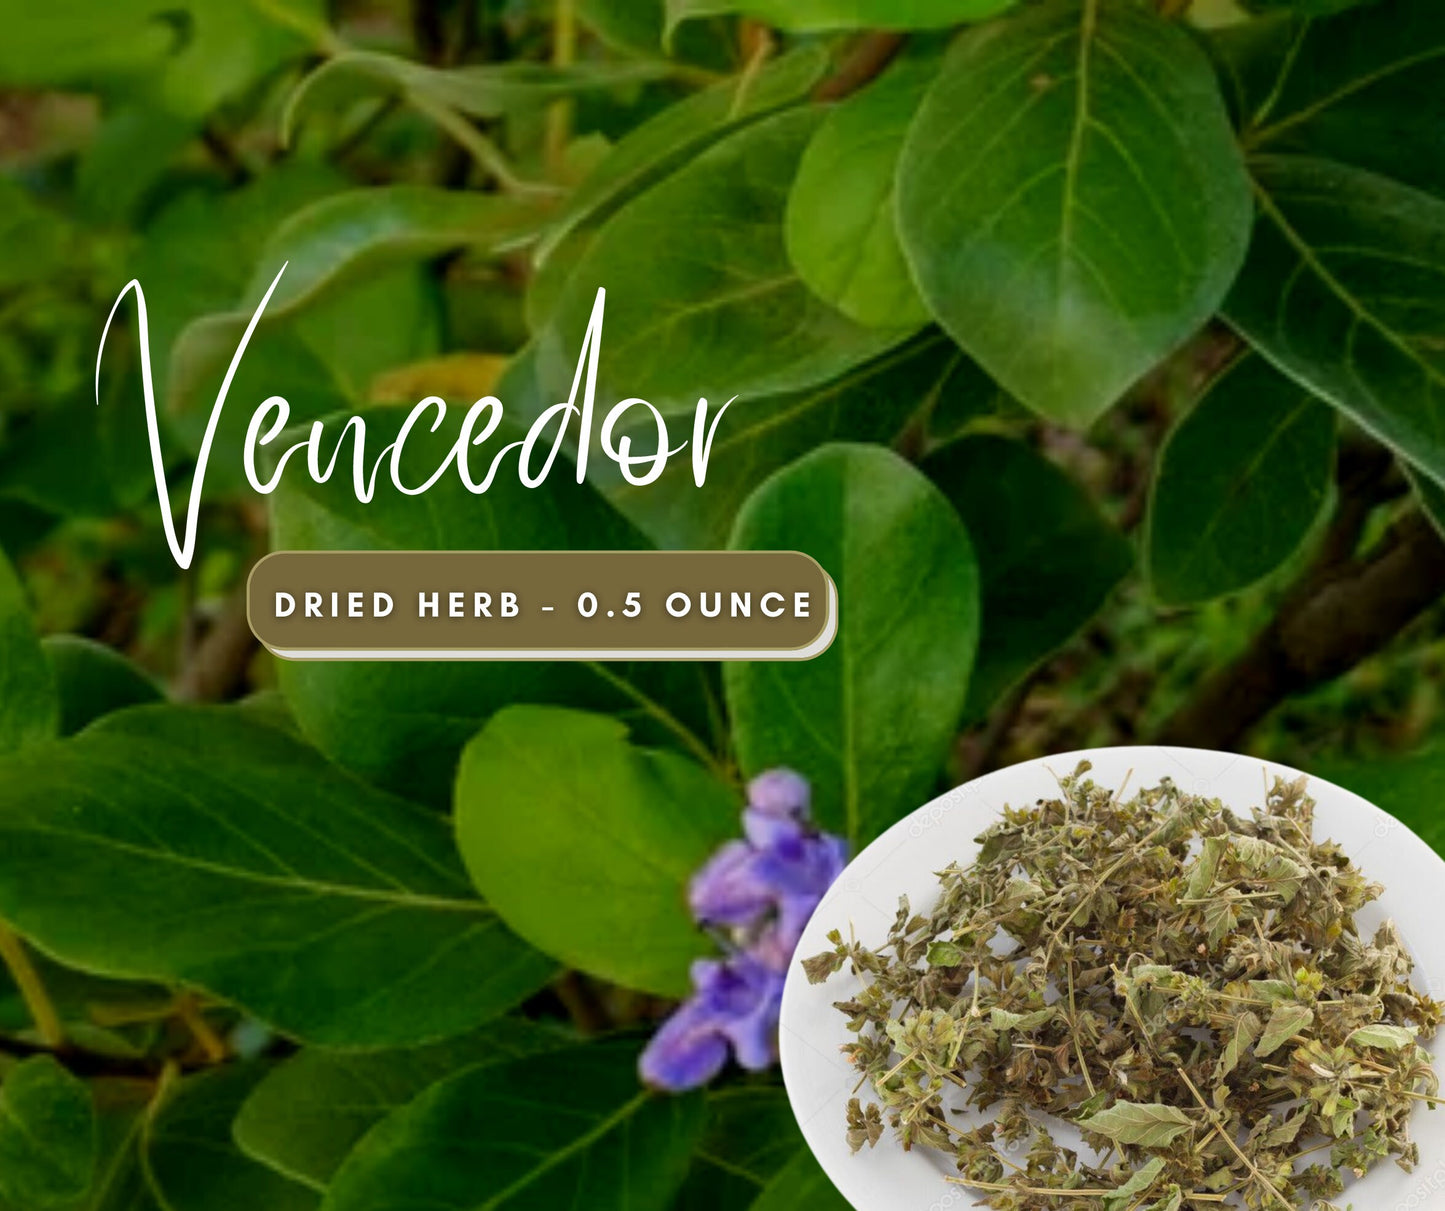 Vencedor / Winner Dried Herb to Win Spiritual Battles and Court Cases - Use for Manifestation Work and to Dominate outcomes to your Favor